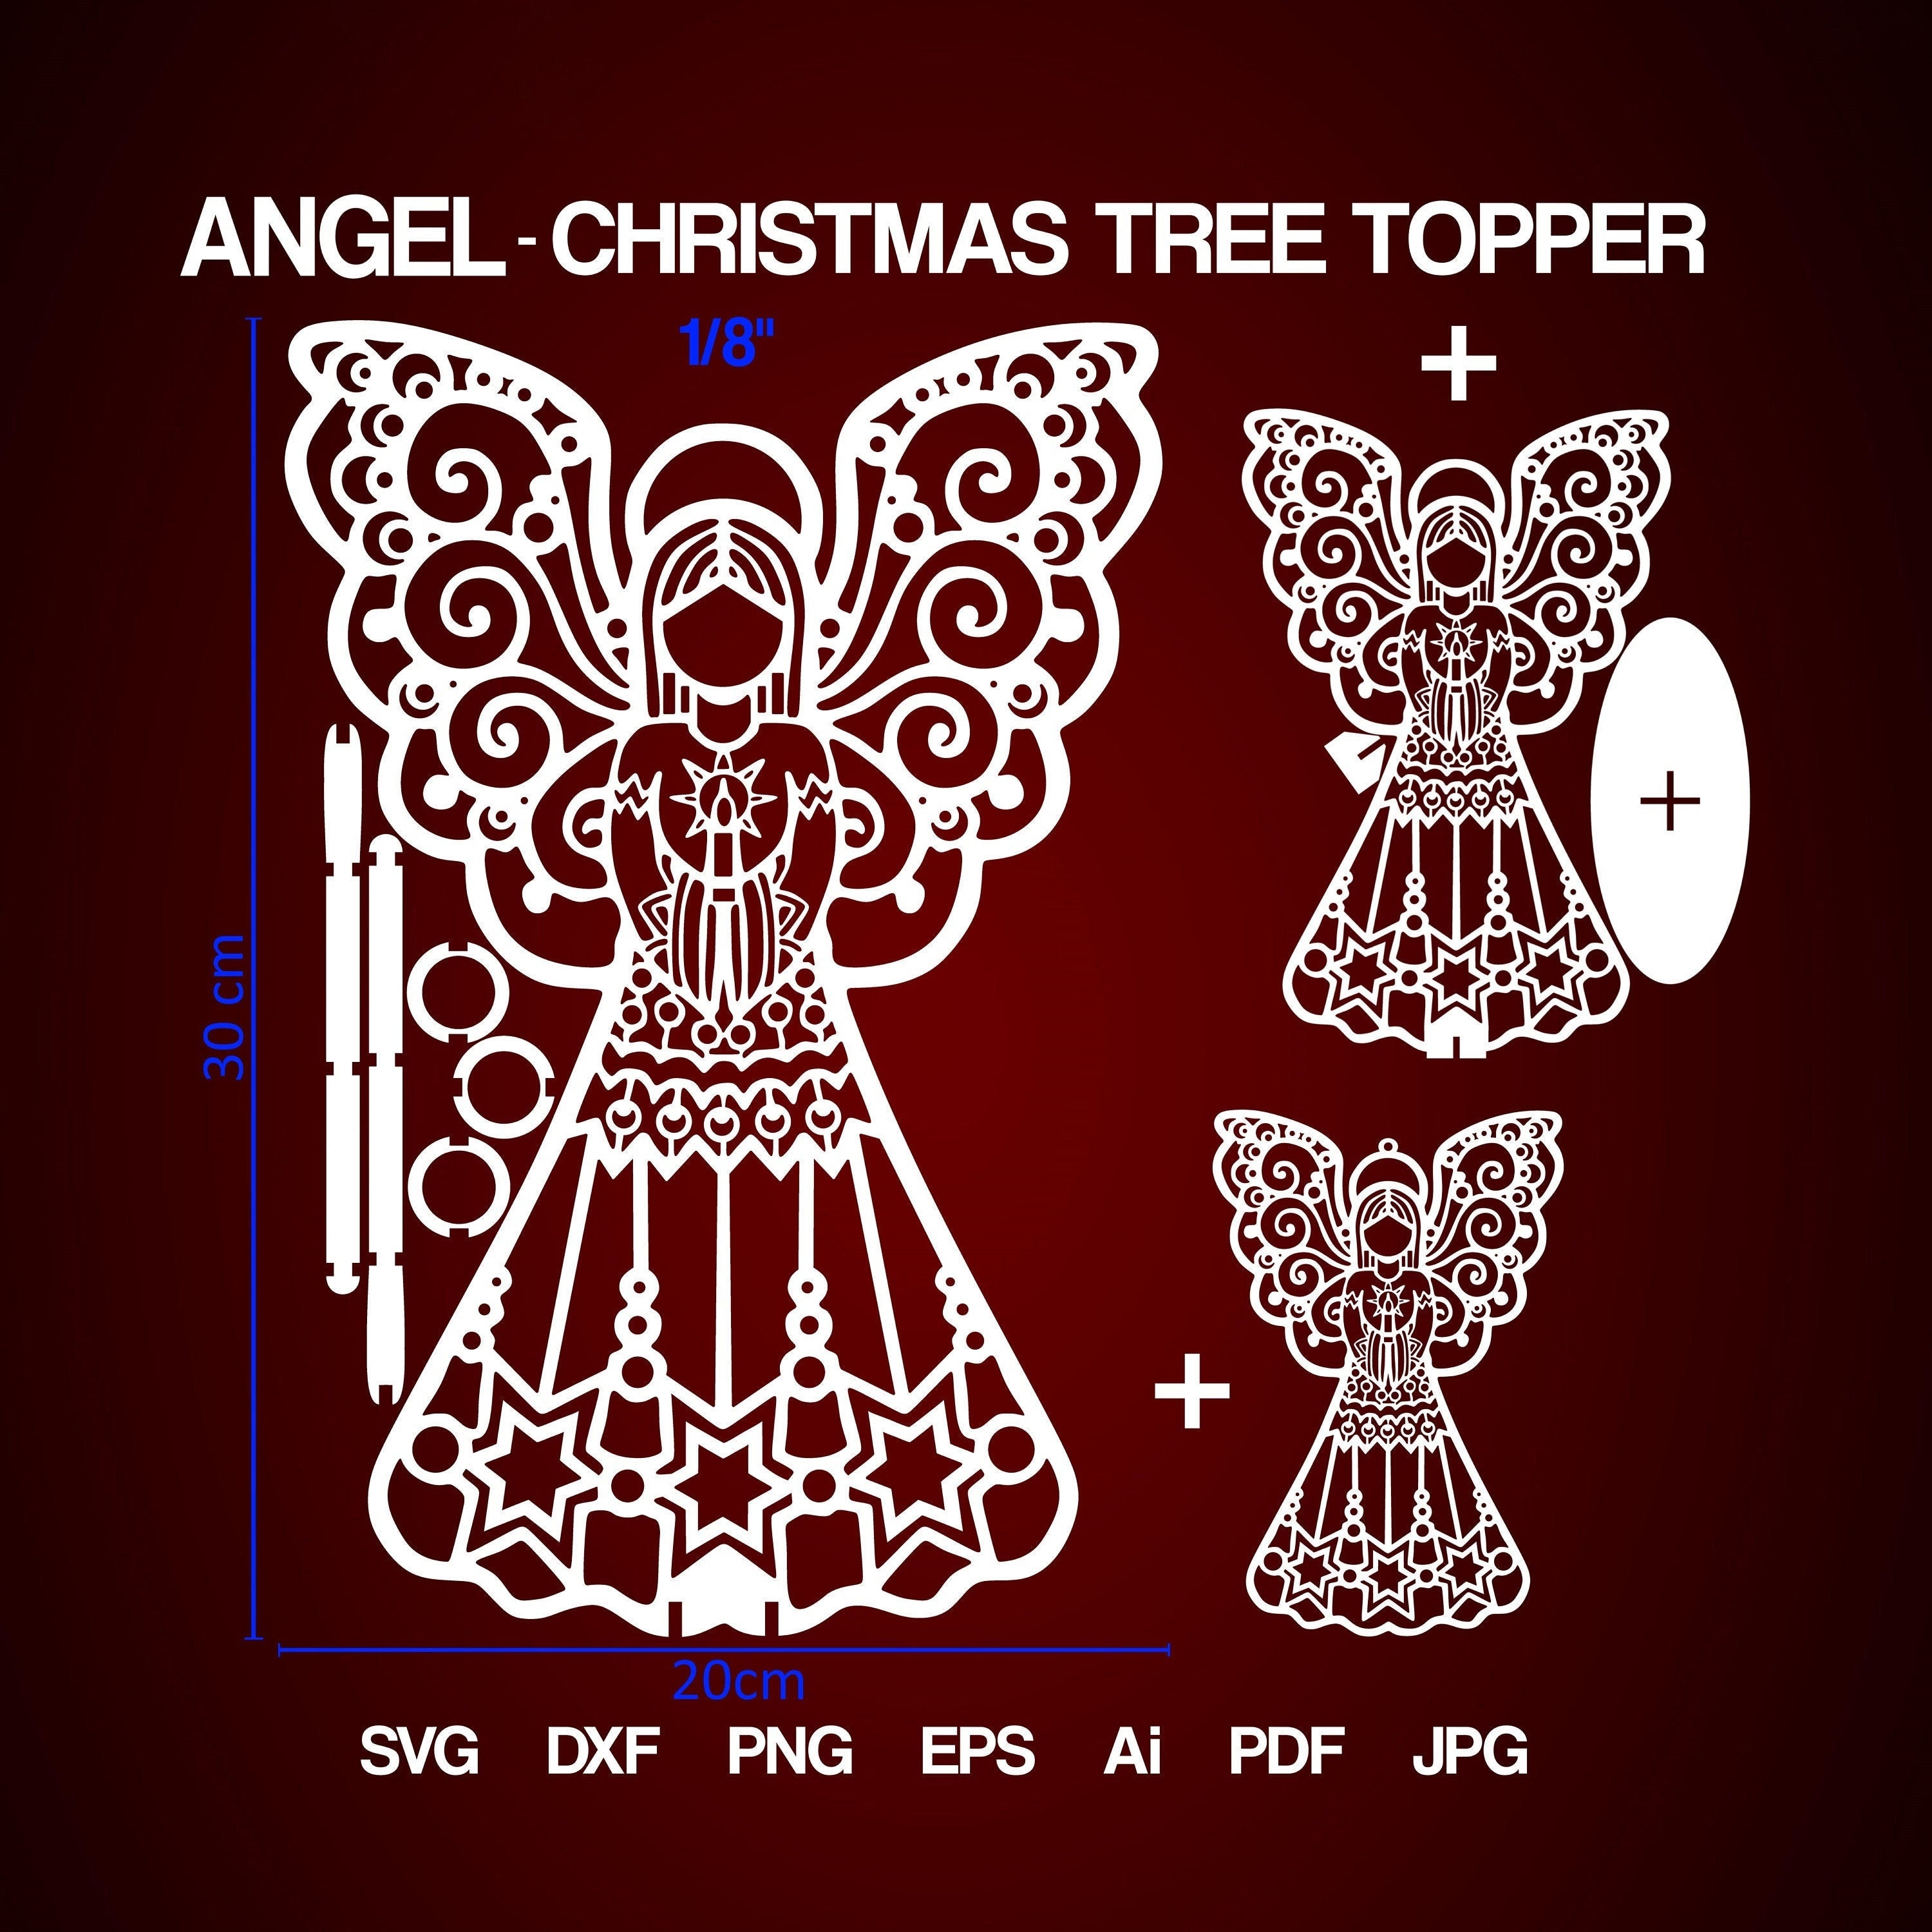 Angel and Star Tree Topper Bundle with Ornaments - Laser Ready Files –  Welcome Home Custom